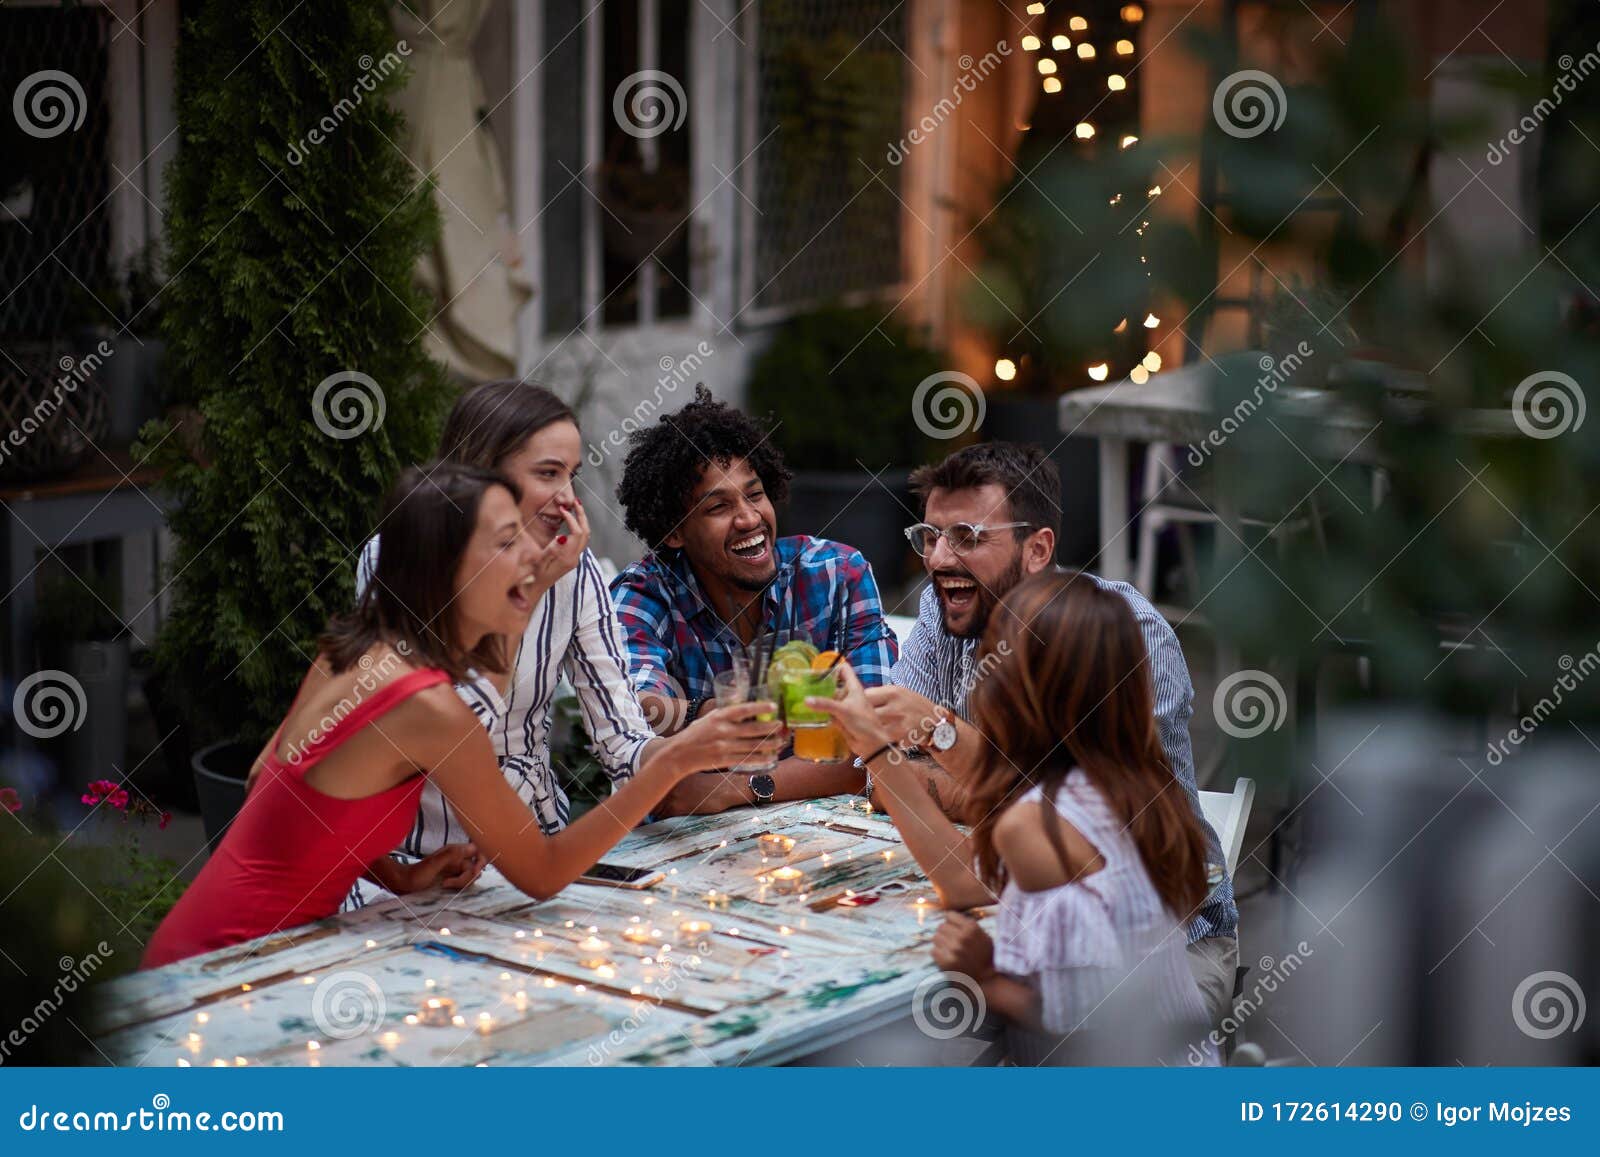 group of five adults making toast with cocktails, at the outdoor bar, laughing, having fun. fun, party, socializing, multiethnic,